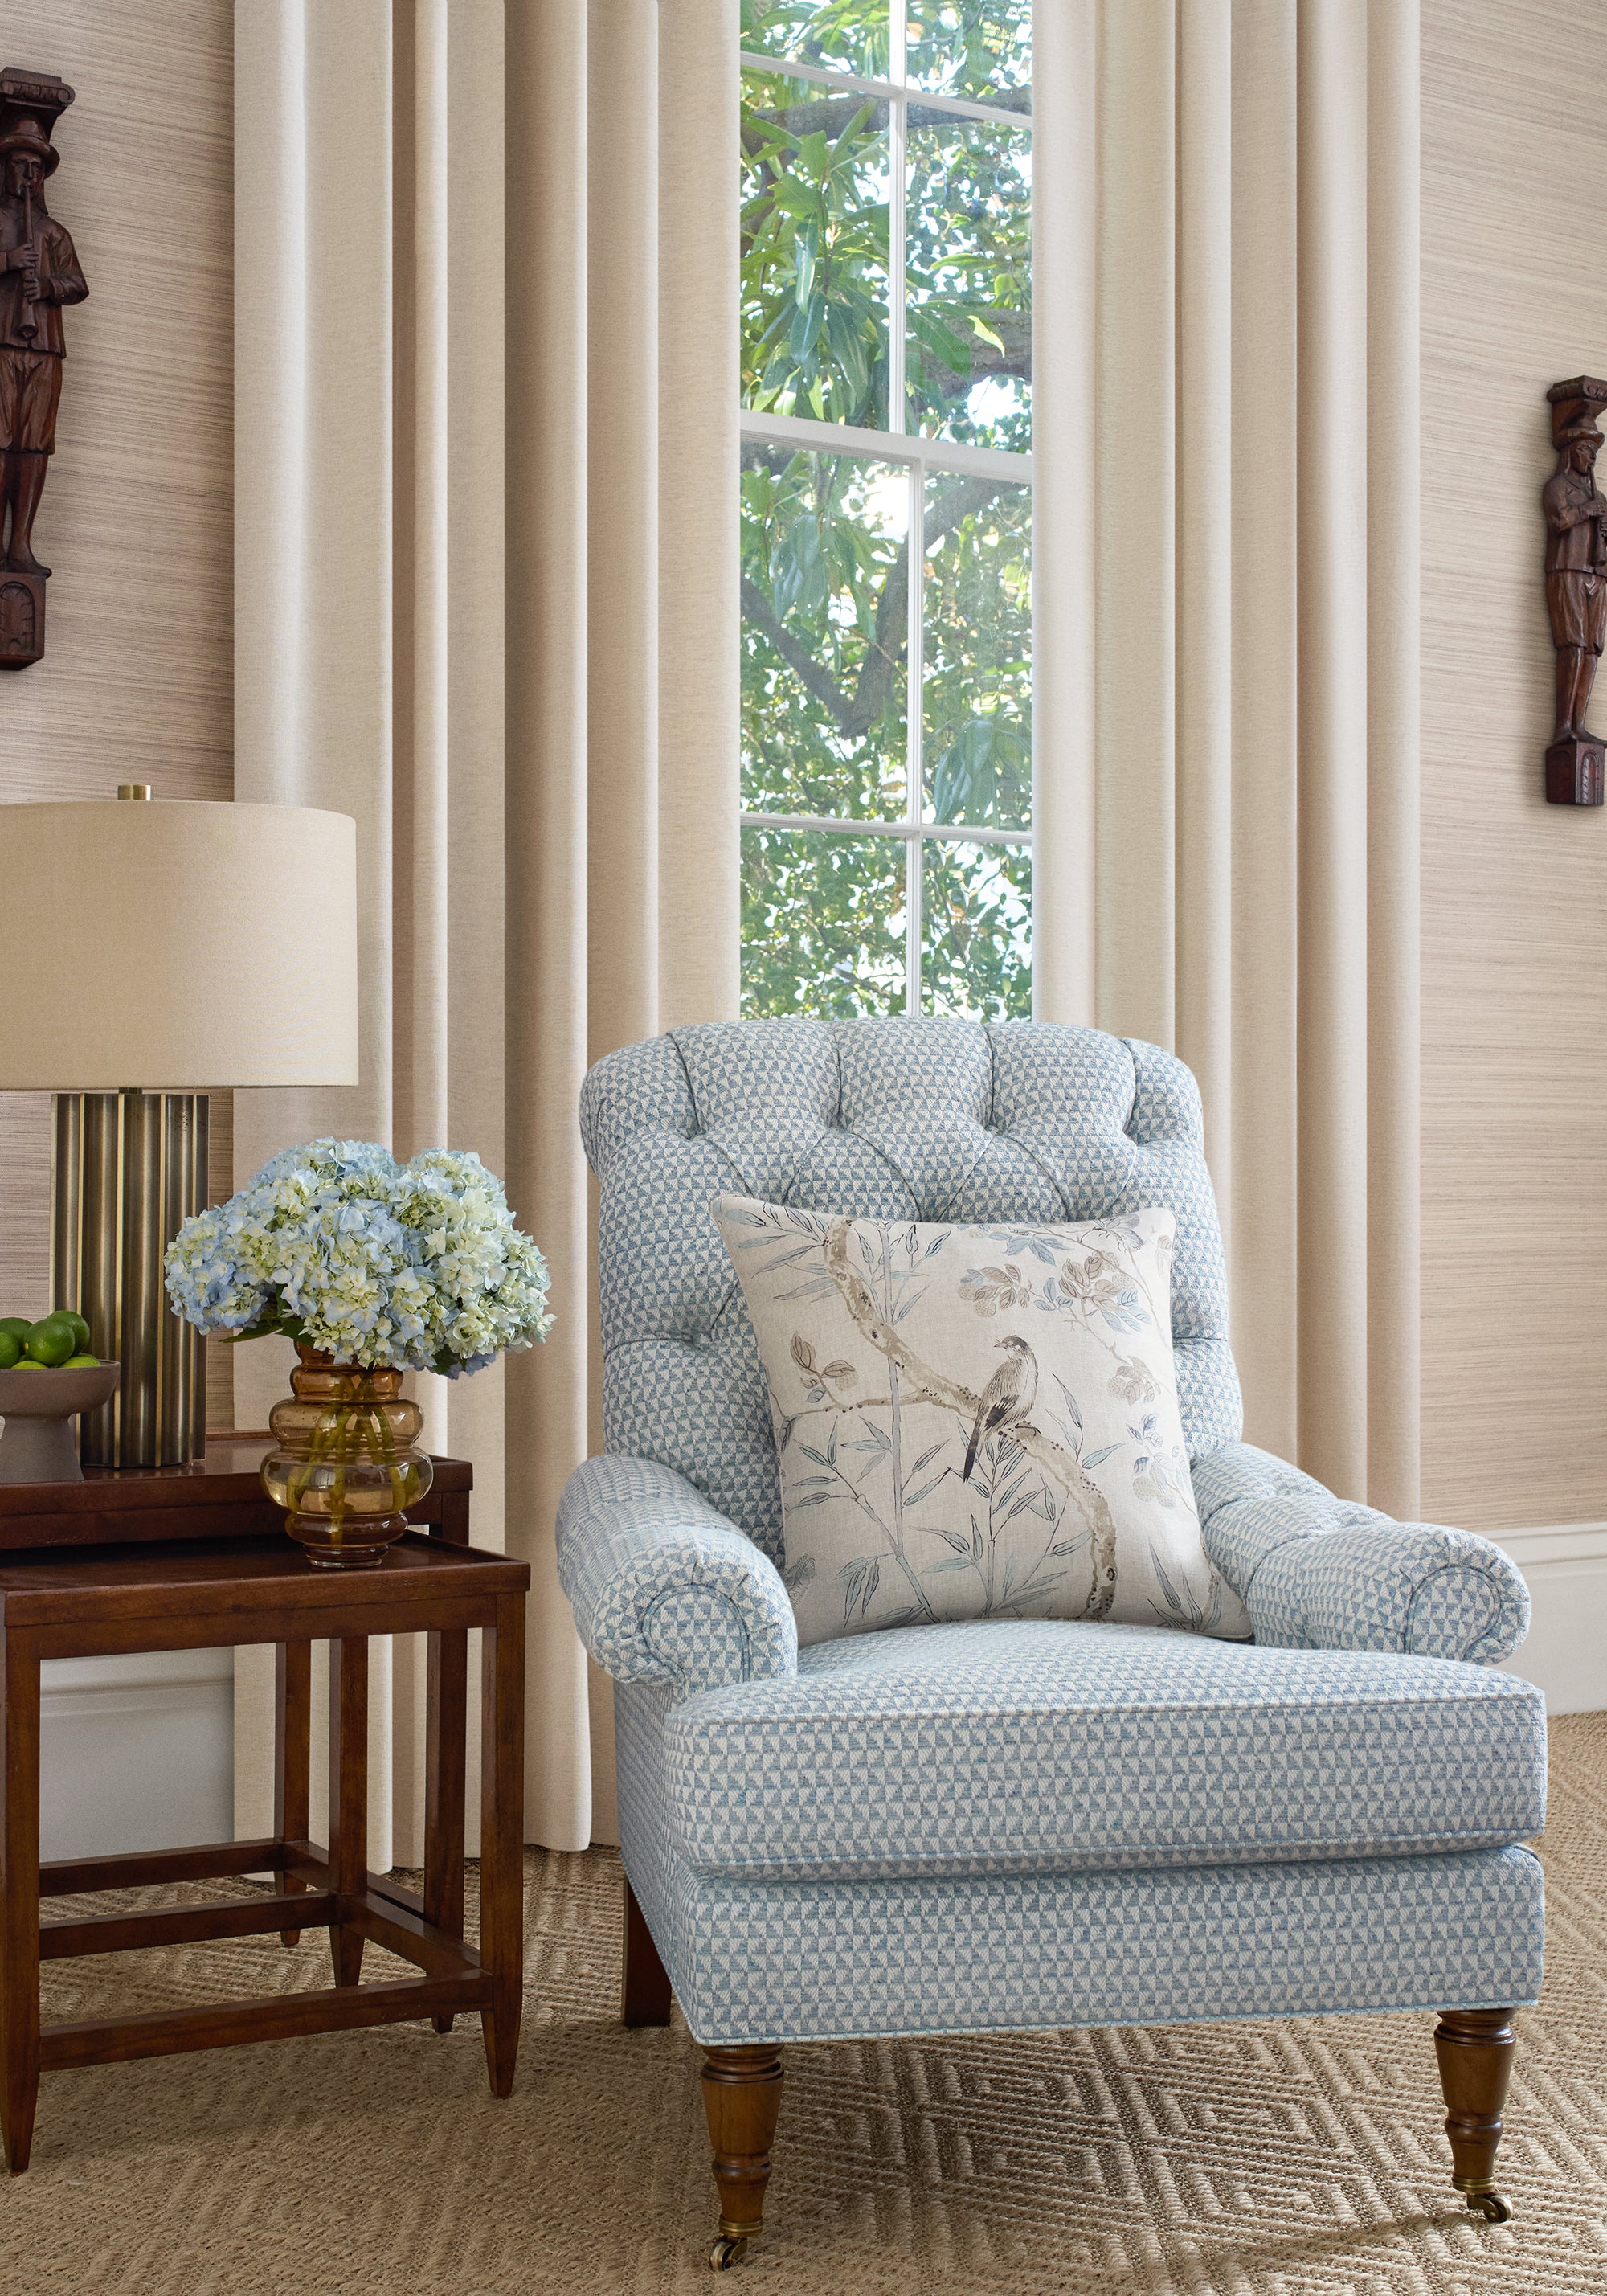 Cambridge Chair in Pollux woven fabric in sky color - pattern number W81910 by Anna French in the Bristol collection